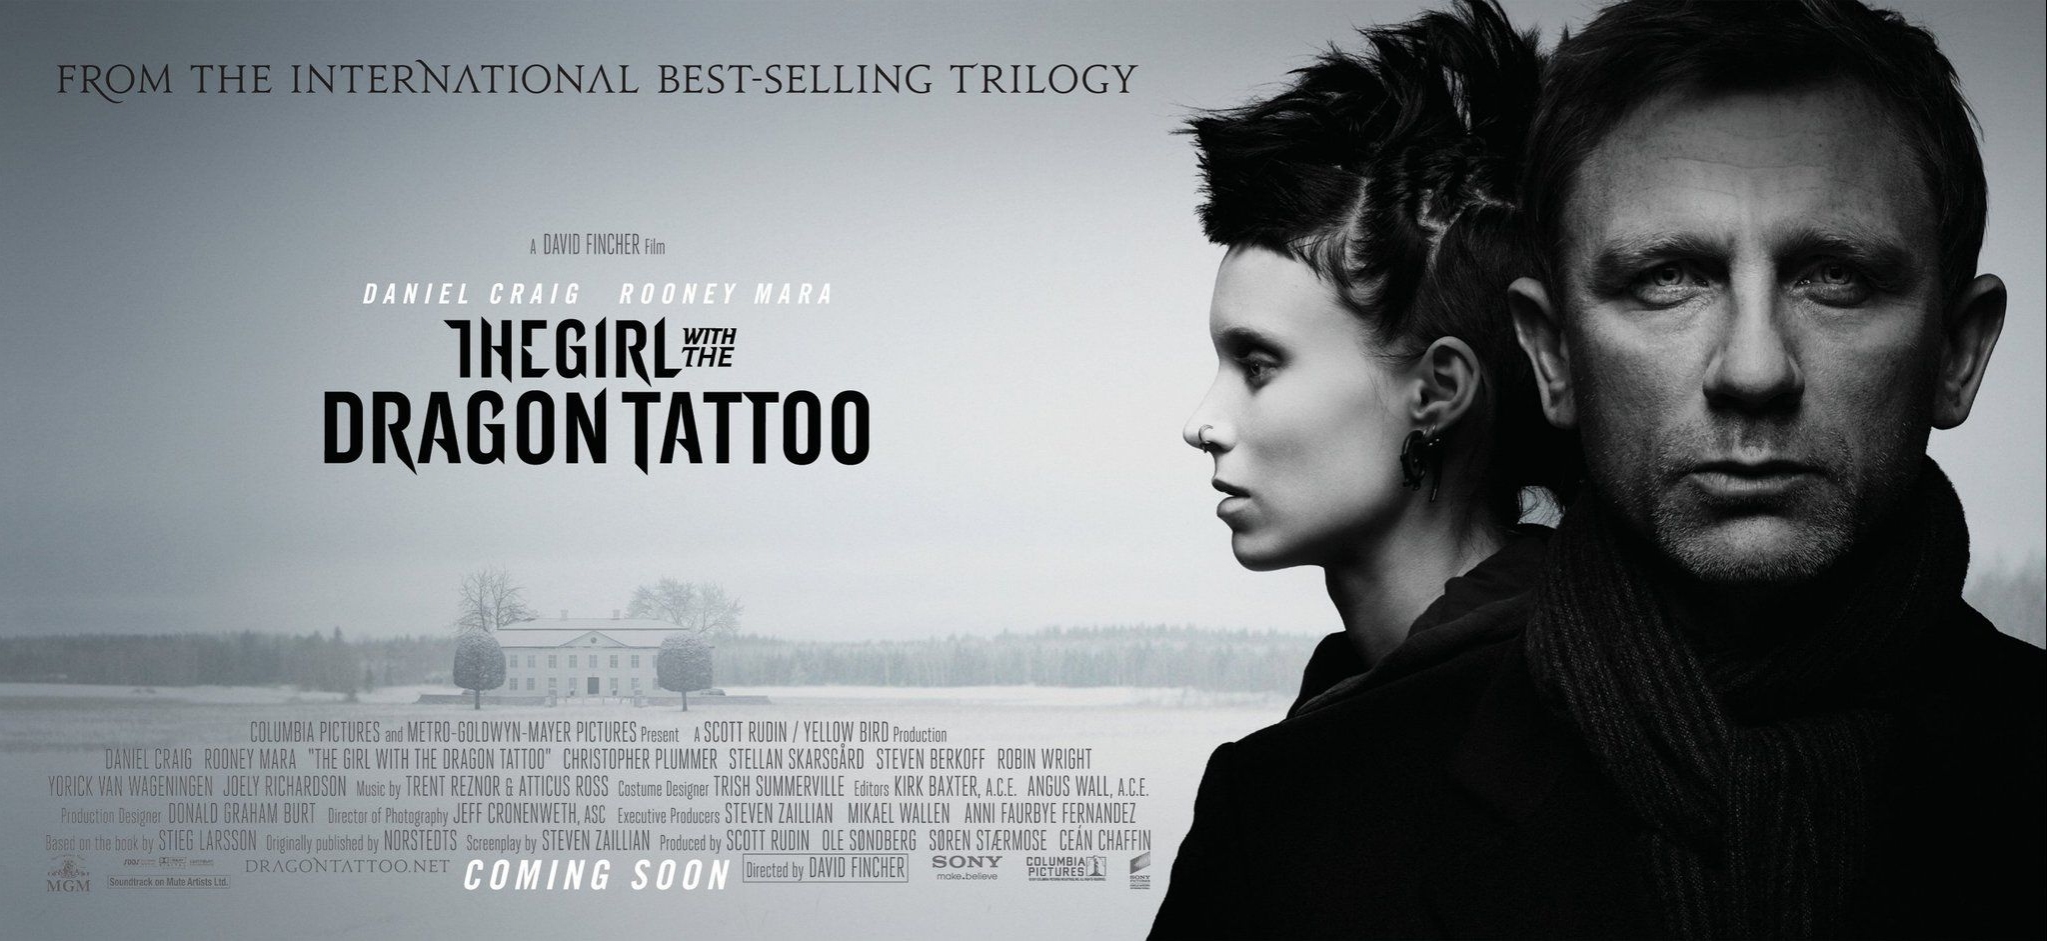 The Girl With The Dragon Tattoo #10